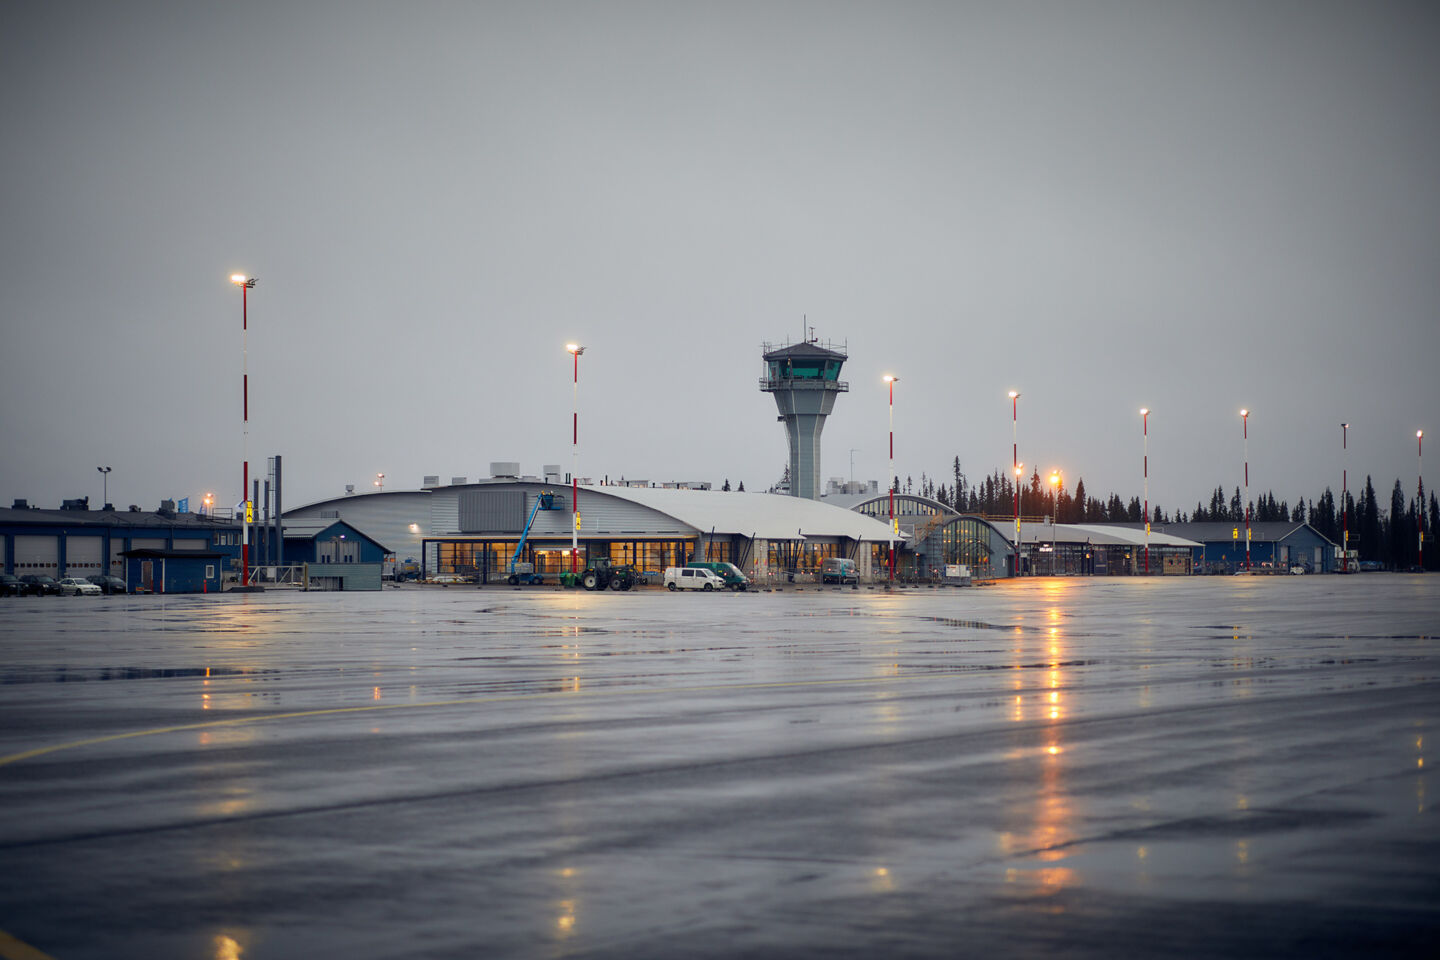 A wet winter day at the Kittilä Arctic Airport, a filming location in Finnish Lapland